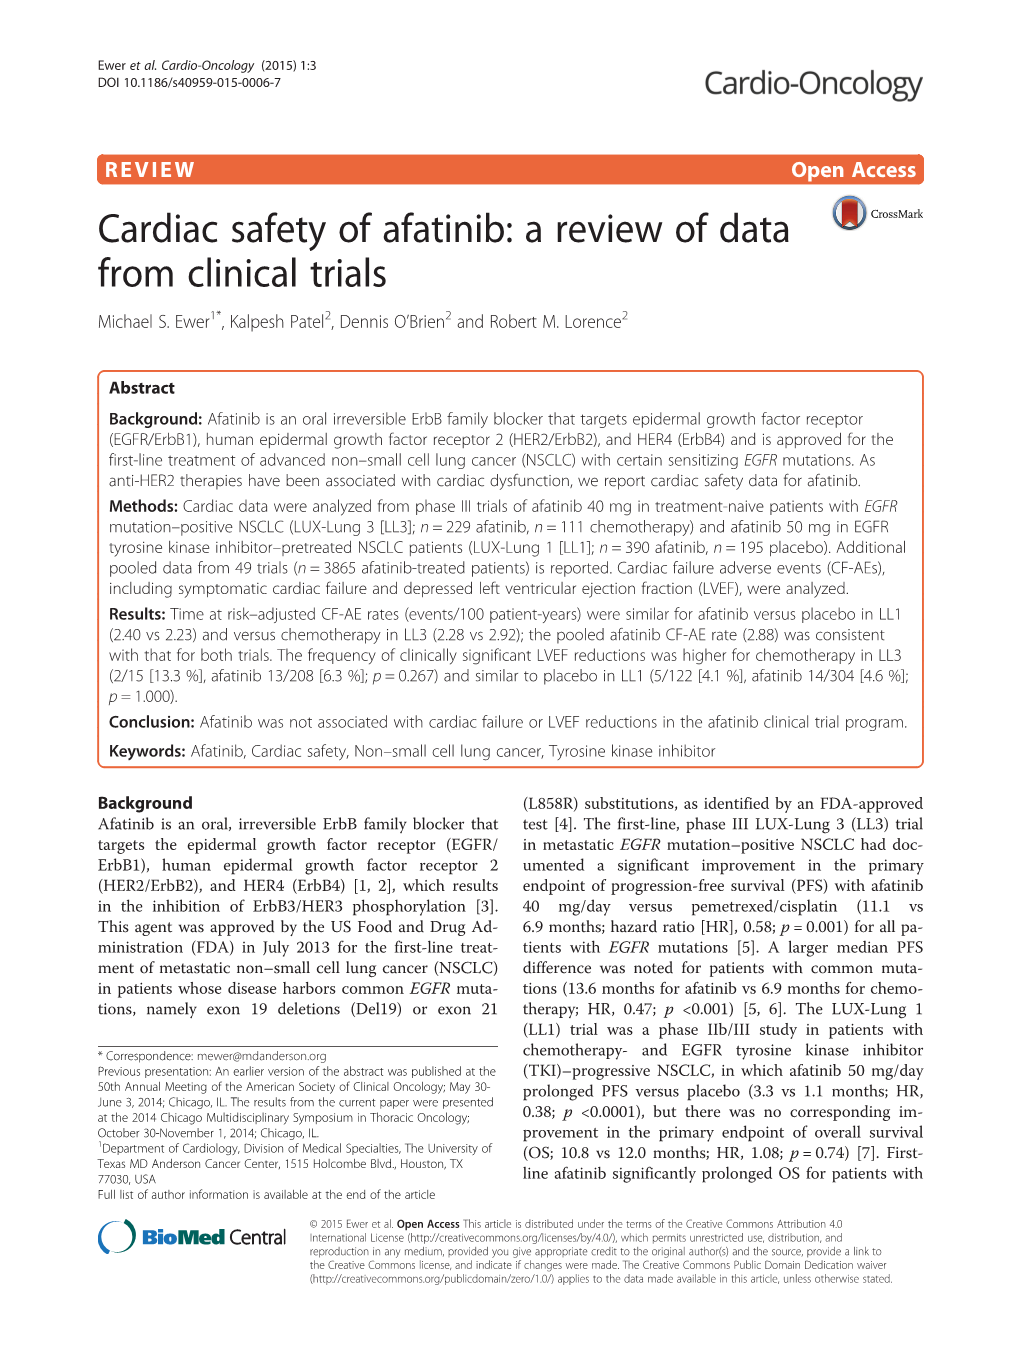 Cardiac Safety of Afatinib: a Review of Data from Clinical Trials Michael S